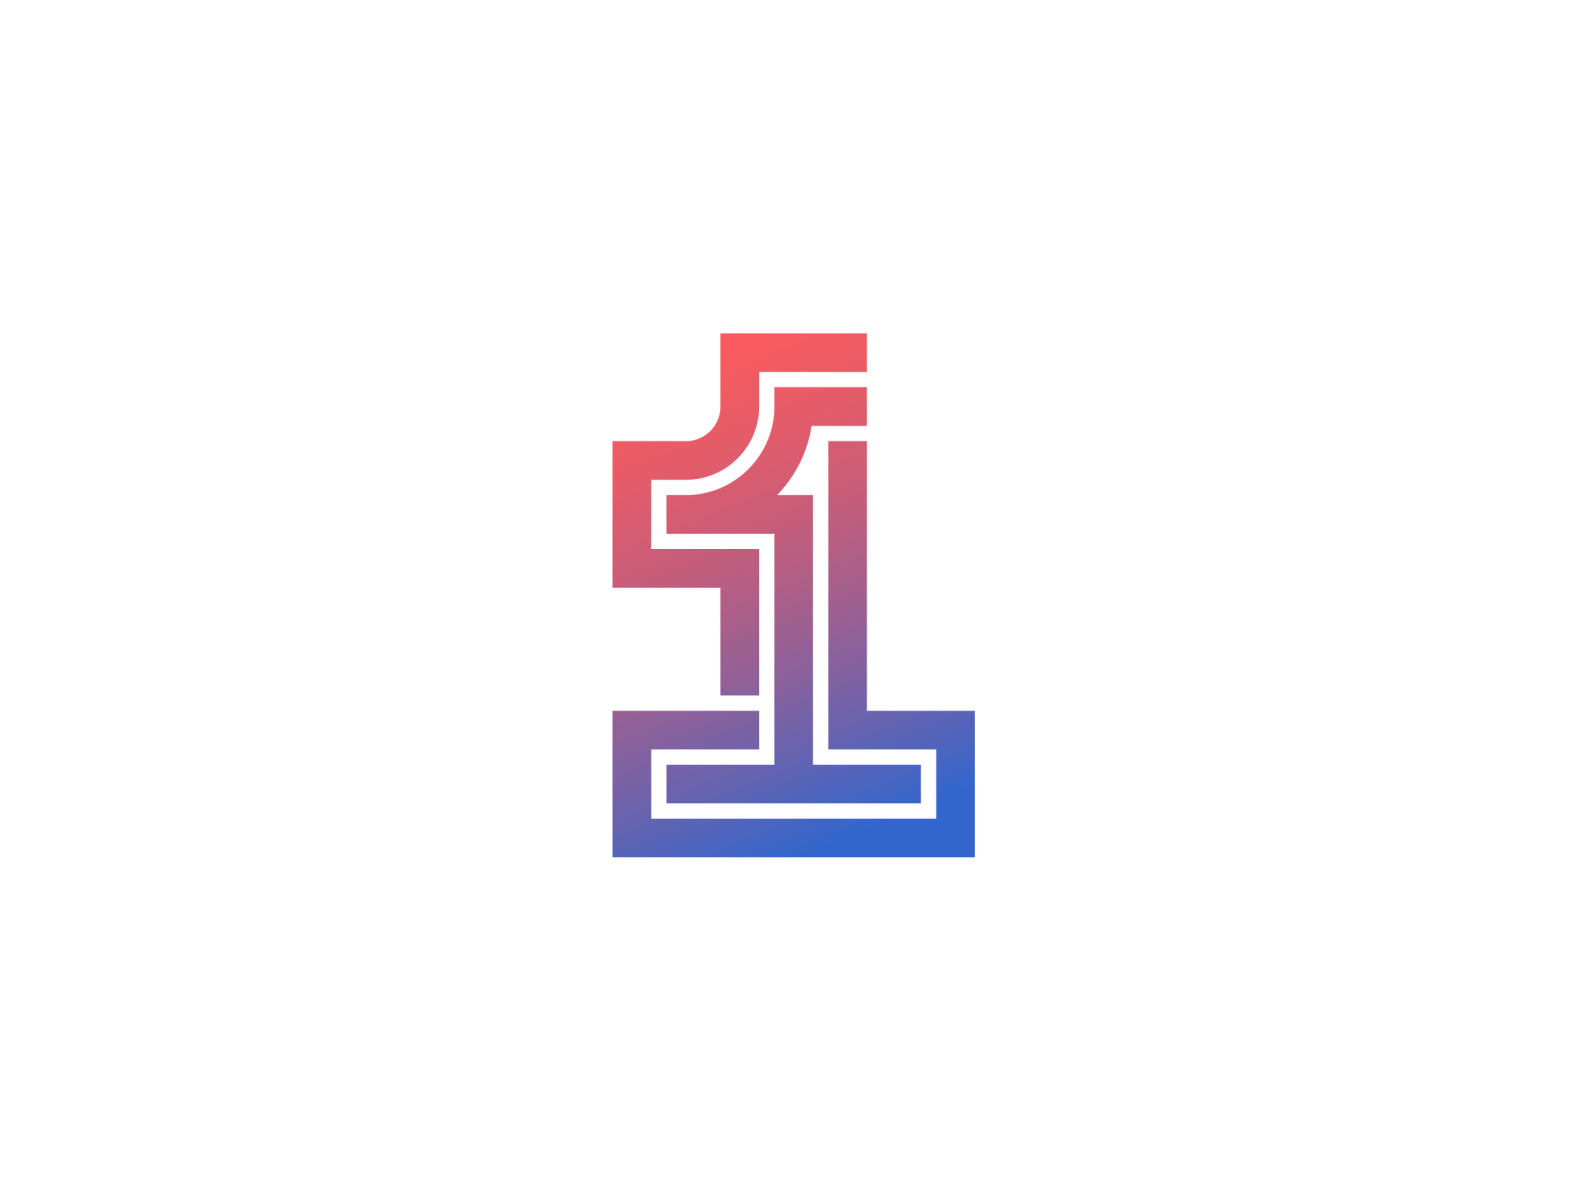 Number 1 by Arto Jegas on Dribbble